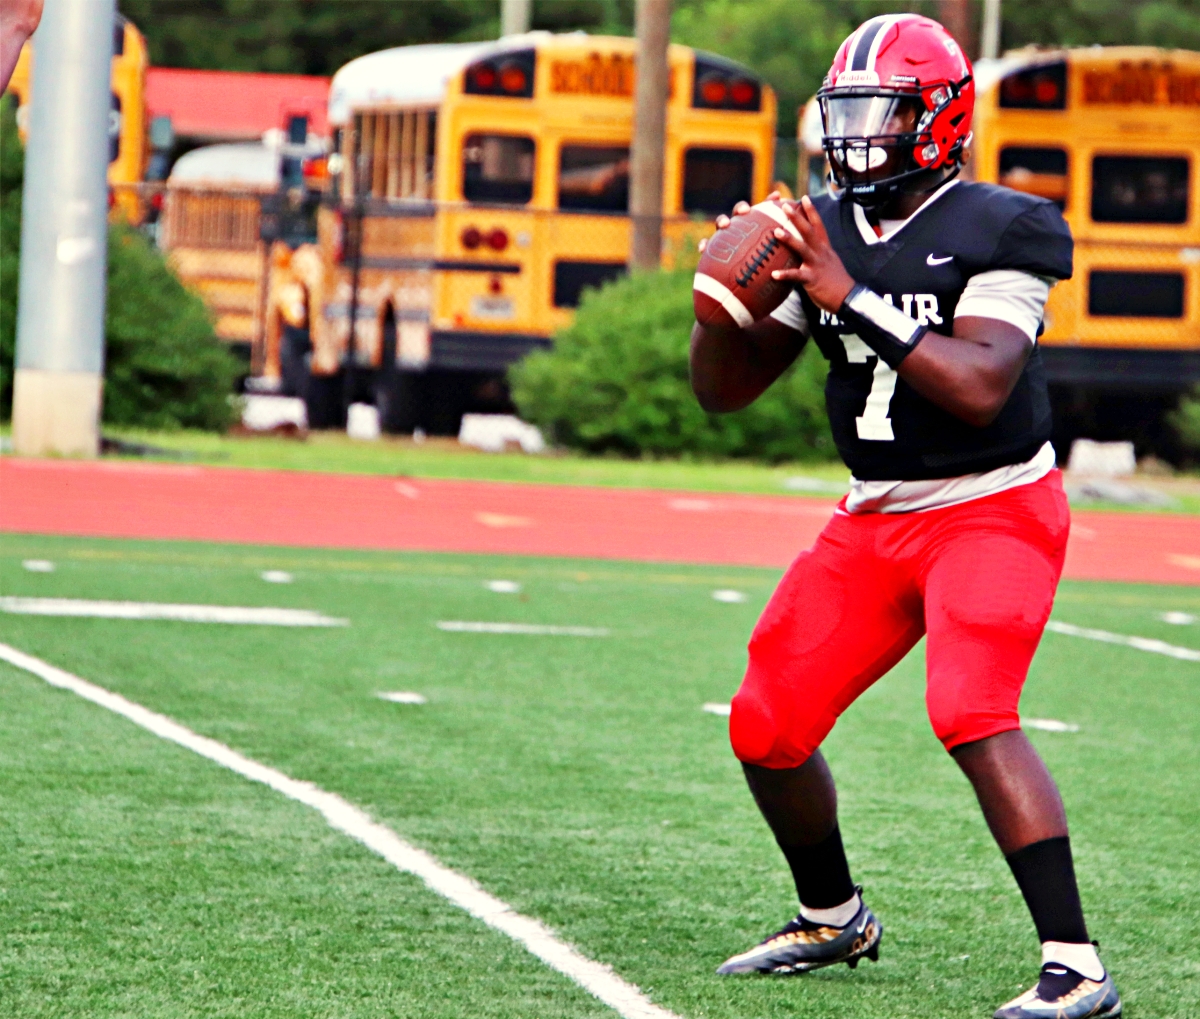 McNair quarterback Jeremy Victor leads the Mustangs against the Druid Hills Red Devils in a battle of 1-0 teams on Friday at 7:30 on the field at North DeKalb Stadium. (Photo by Mark Brock)